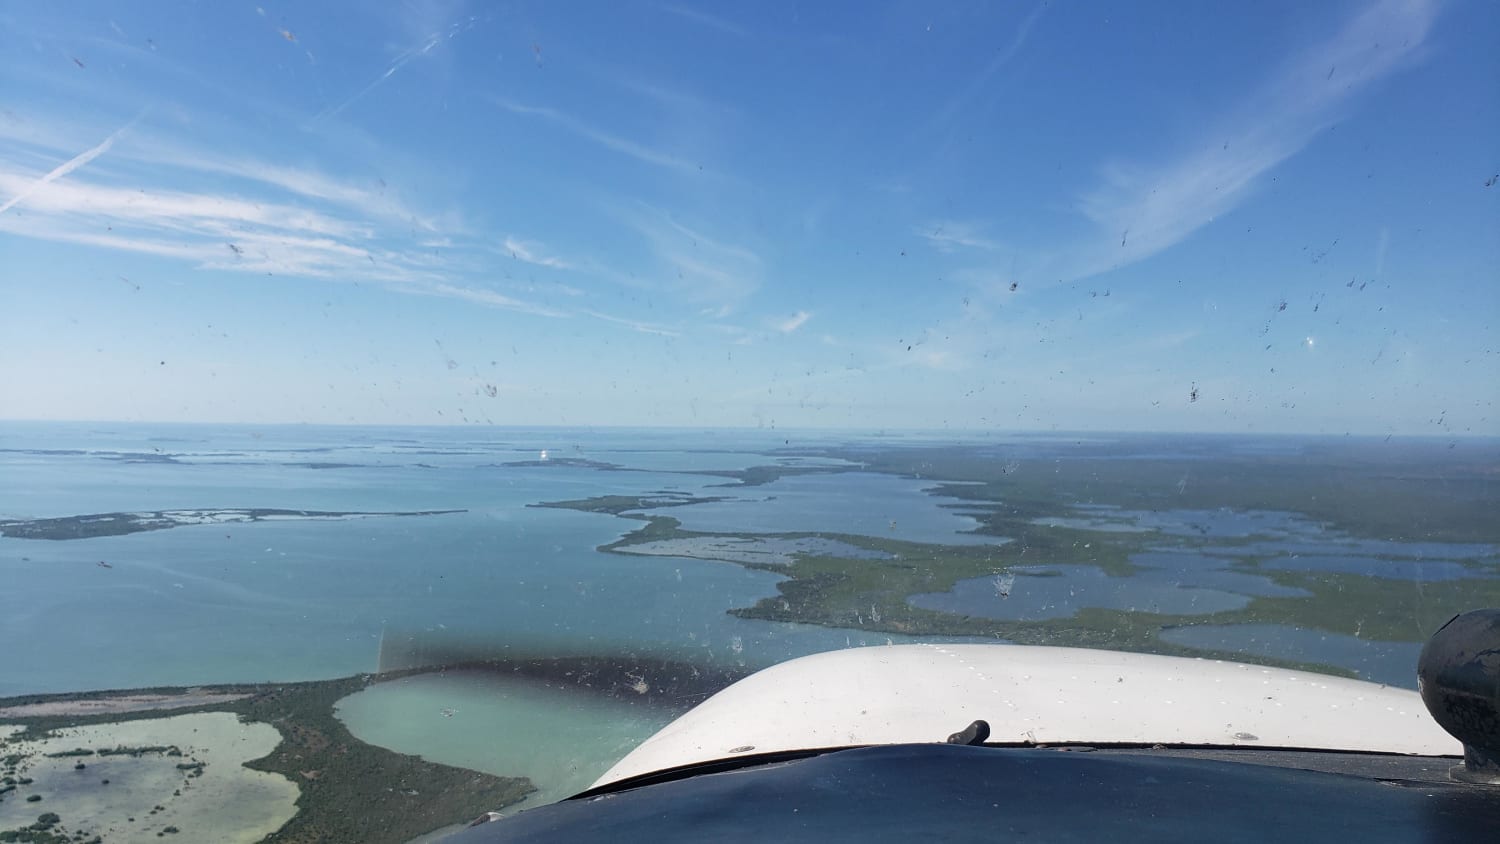 First flight, learning to fly in South Florida has its perks